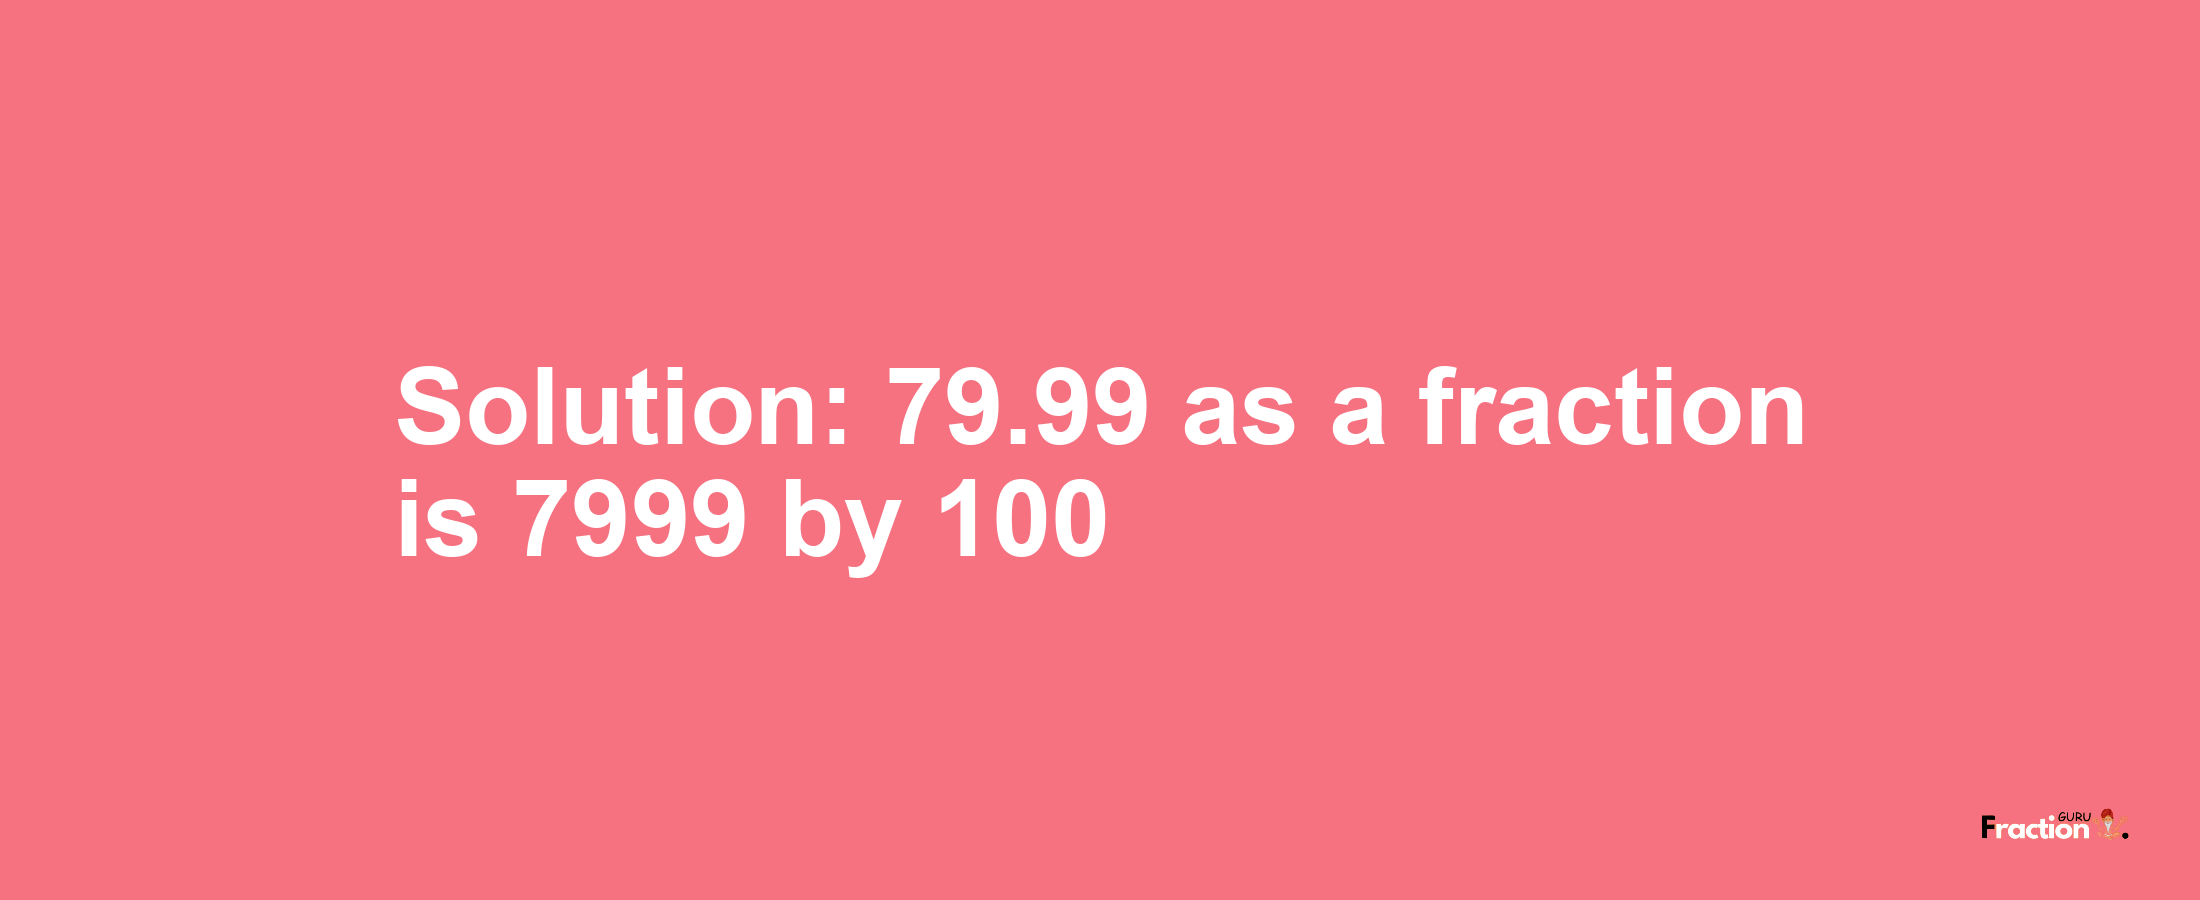 Solution:79.99 as a fraction is 7999/100